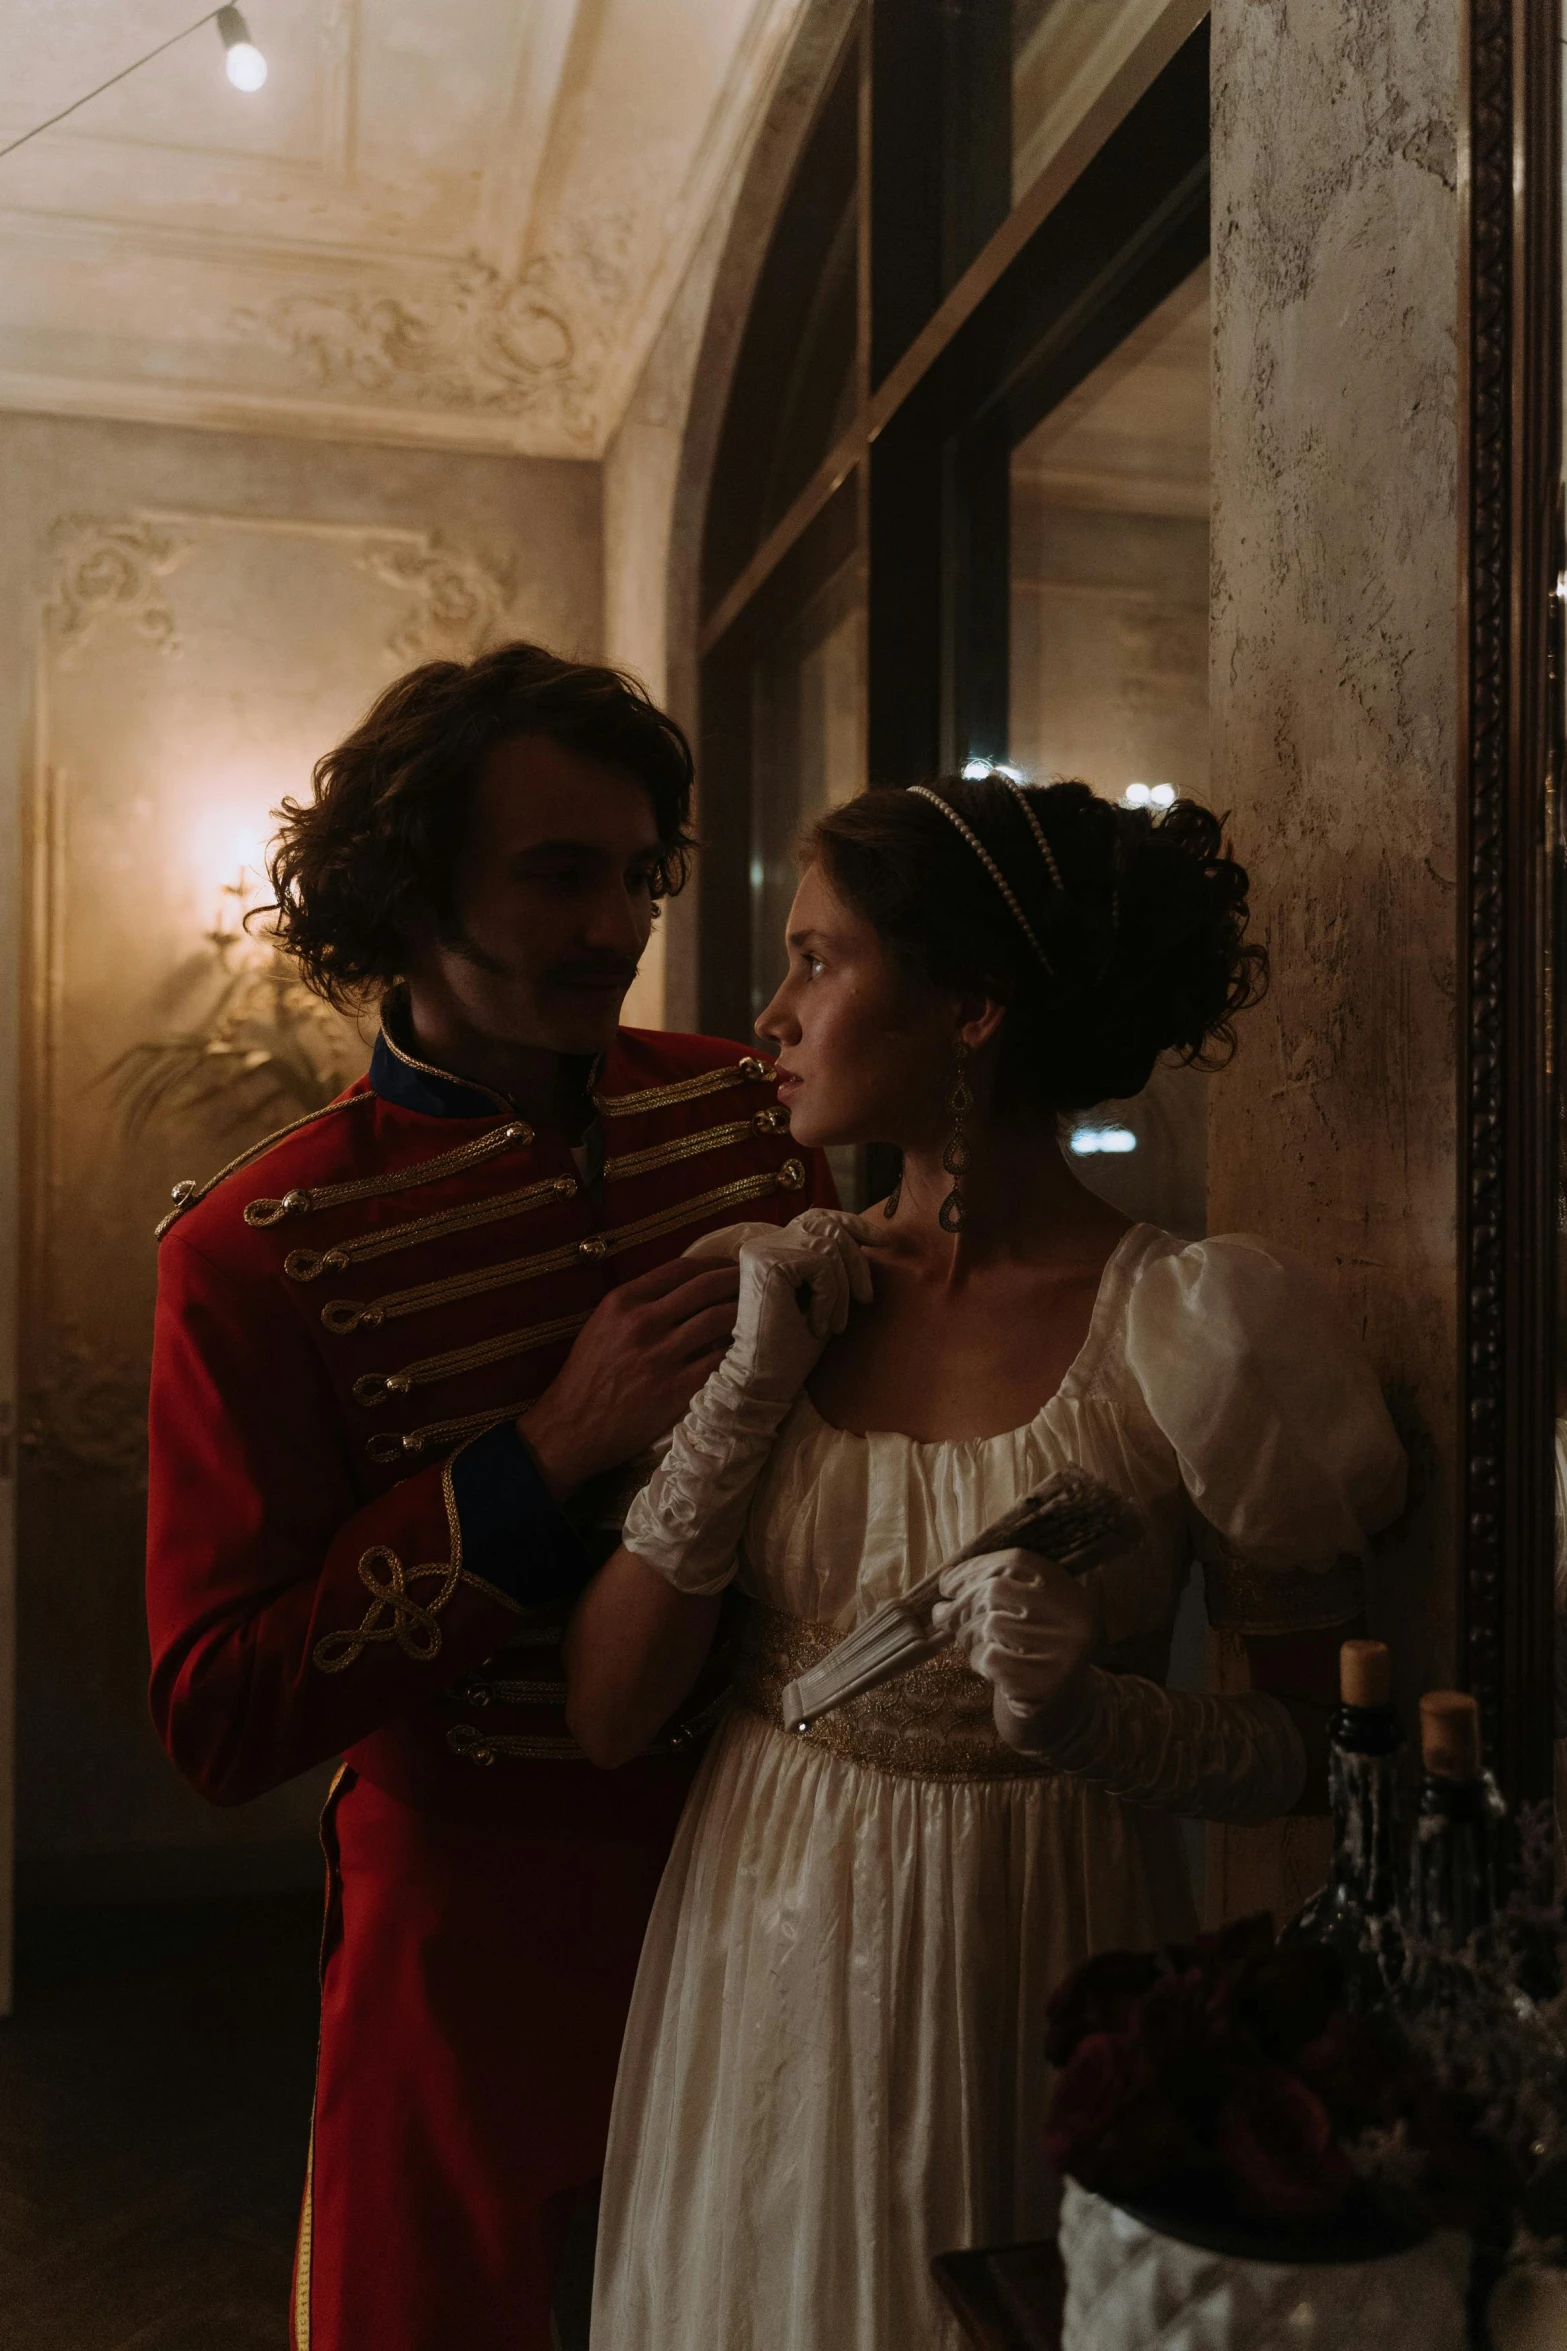 a man standing next to a woman in a dress, inspired by Karl Bryullov, denis villeneuve cinematography, vhs footage still, victoria, [ theatrical ]